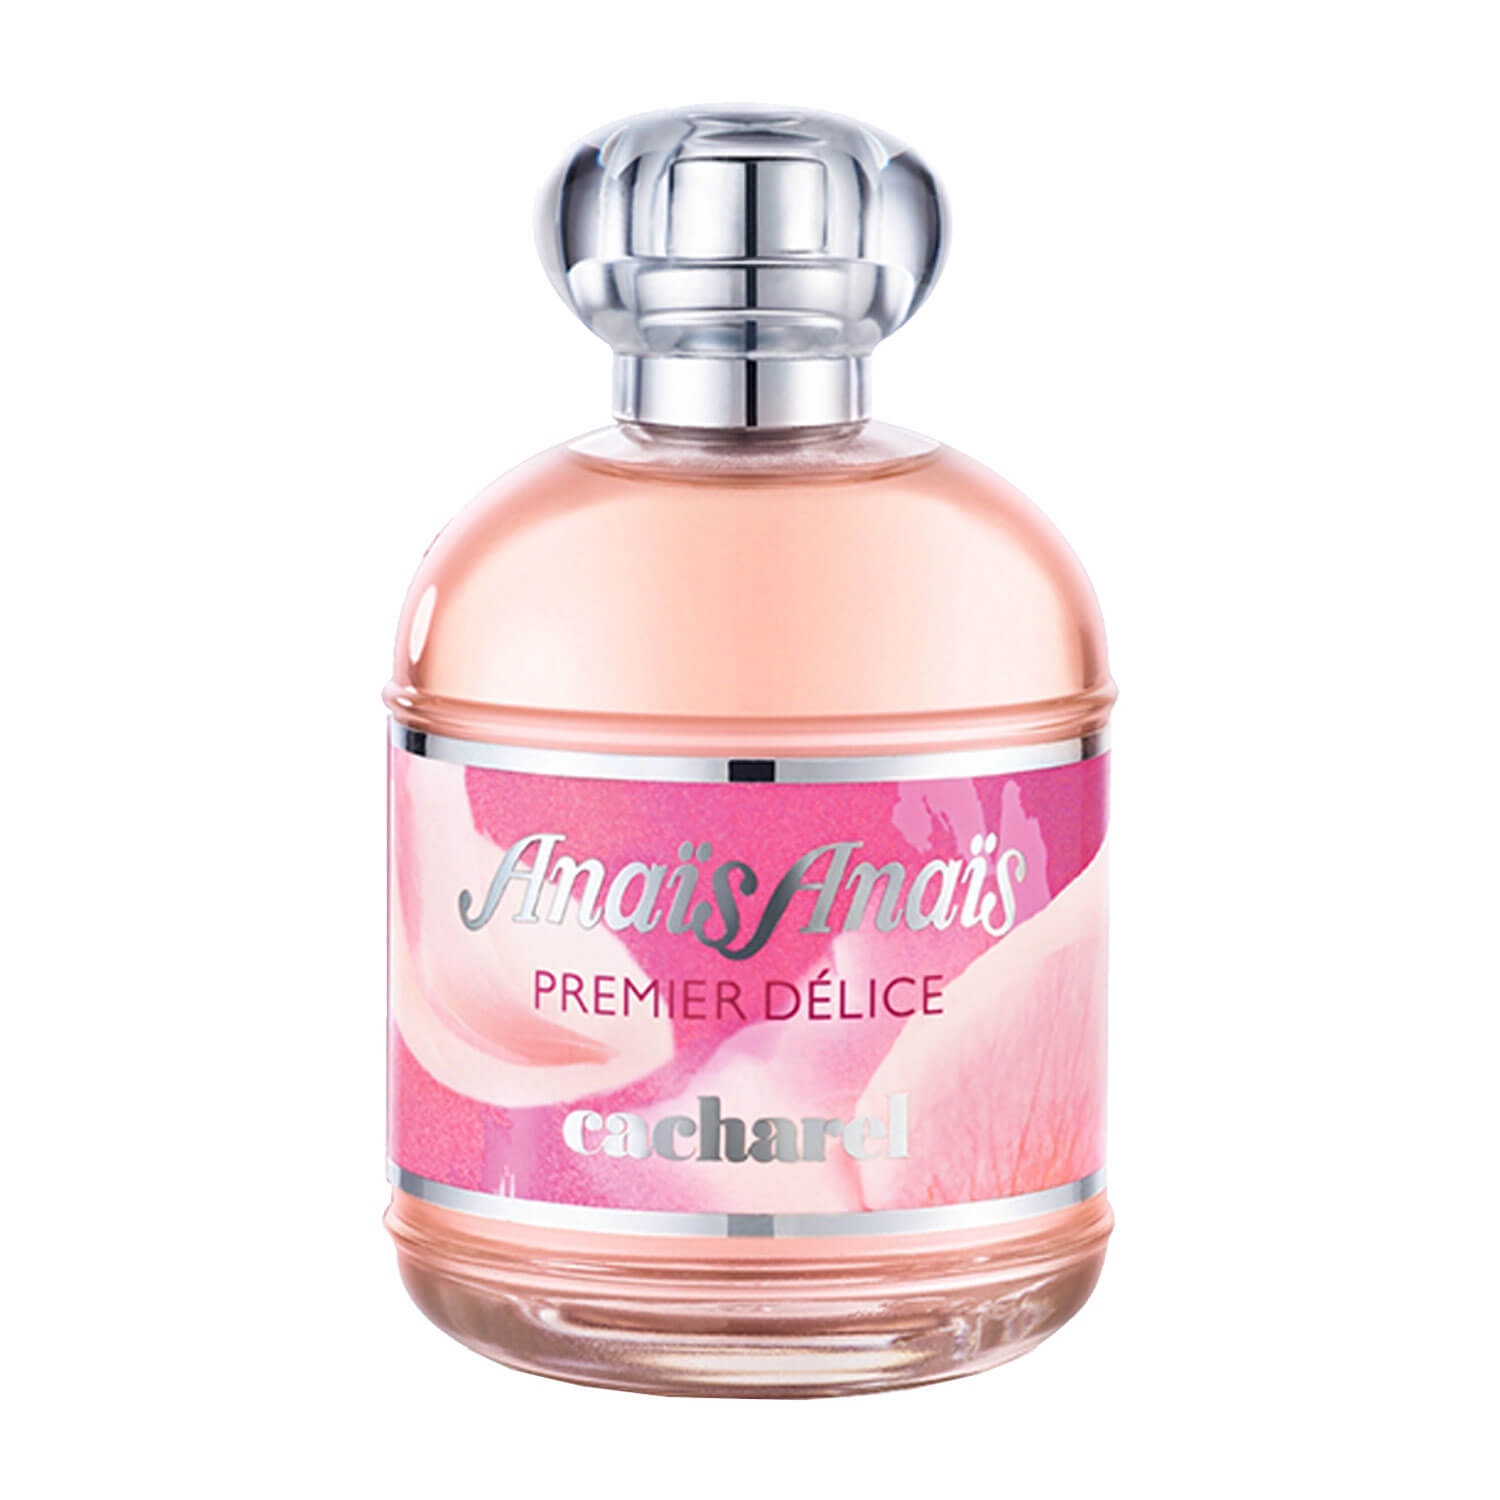 Product image from Cacharel - Anaïs Anaïs Premier Delice EdT